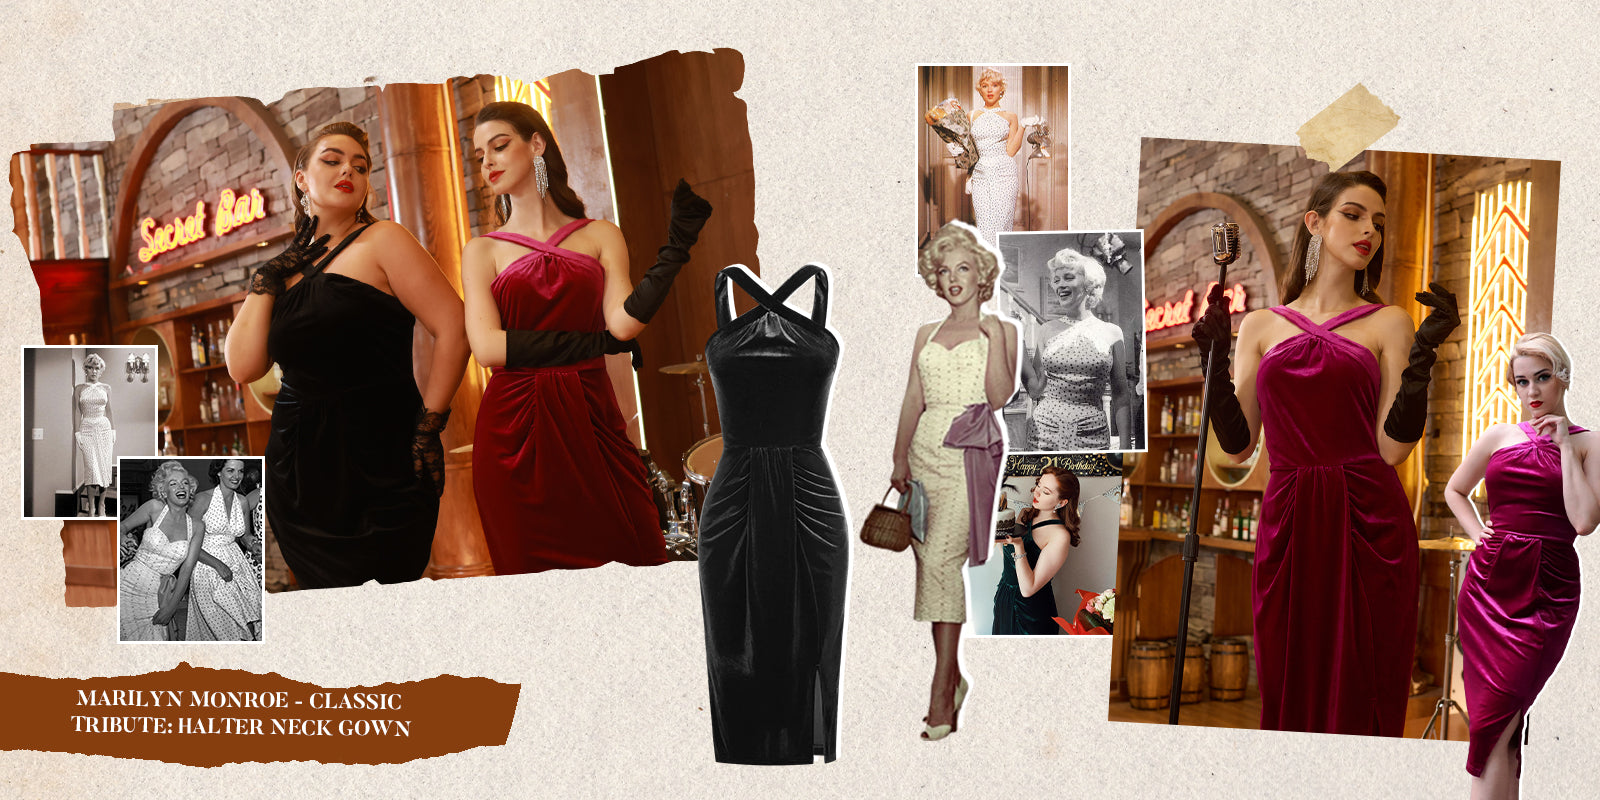 Marilyn Monroe - Classic Tribute: Halter Neck Gown